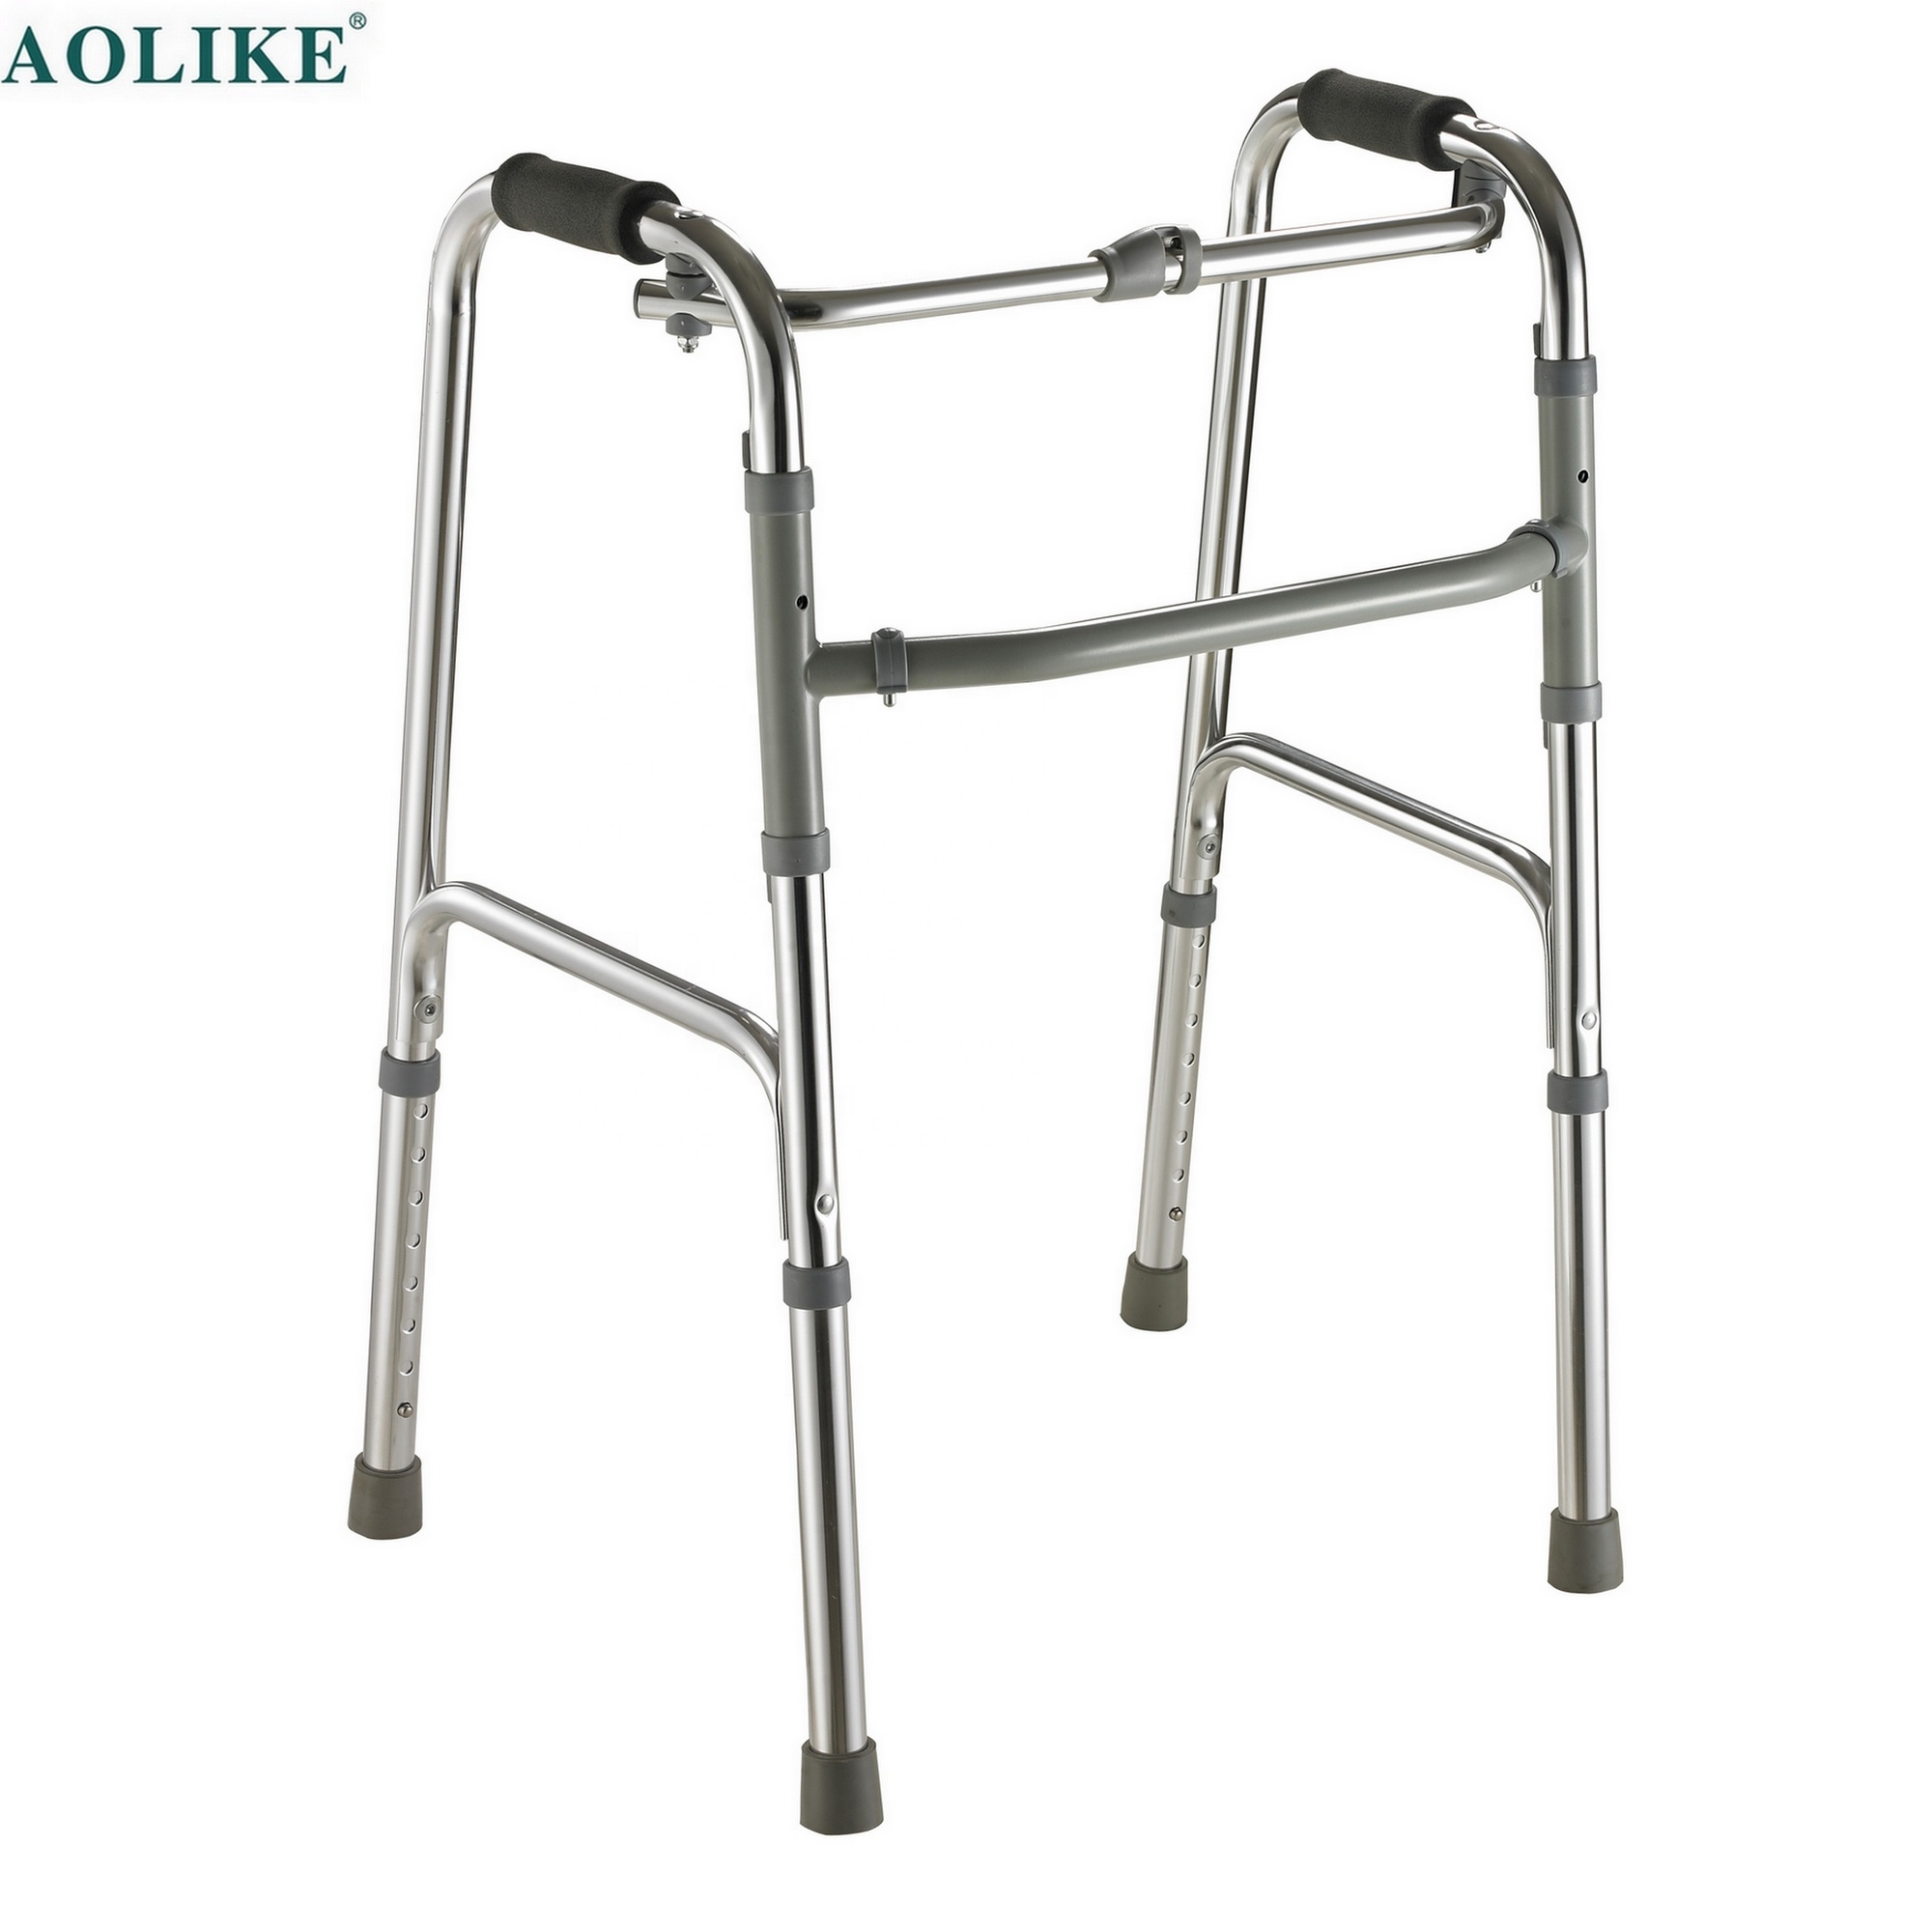 ALK713LCost-competitiveness Folding Disabled Walker Lightweight Rehabilitation Therapy Supplies Outdoor Homecare Hospital 2.3kg